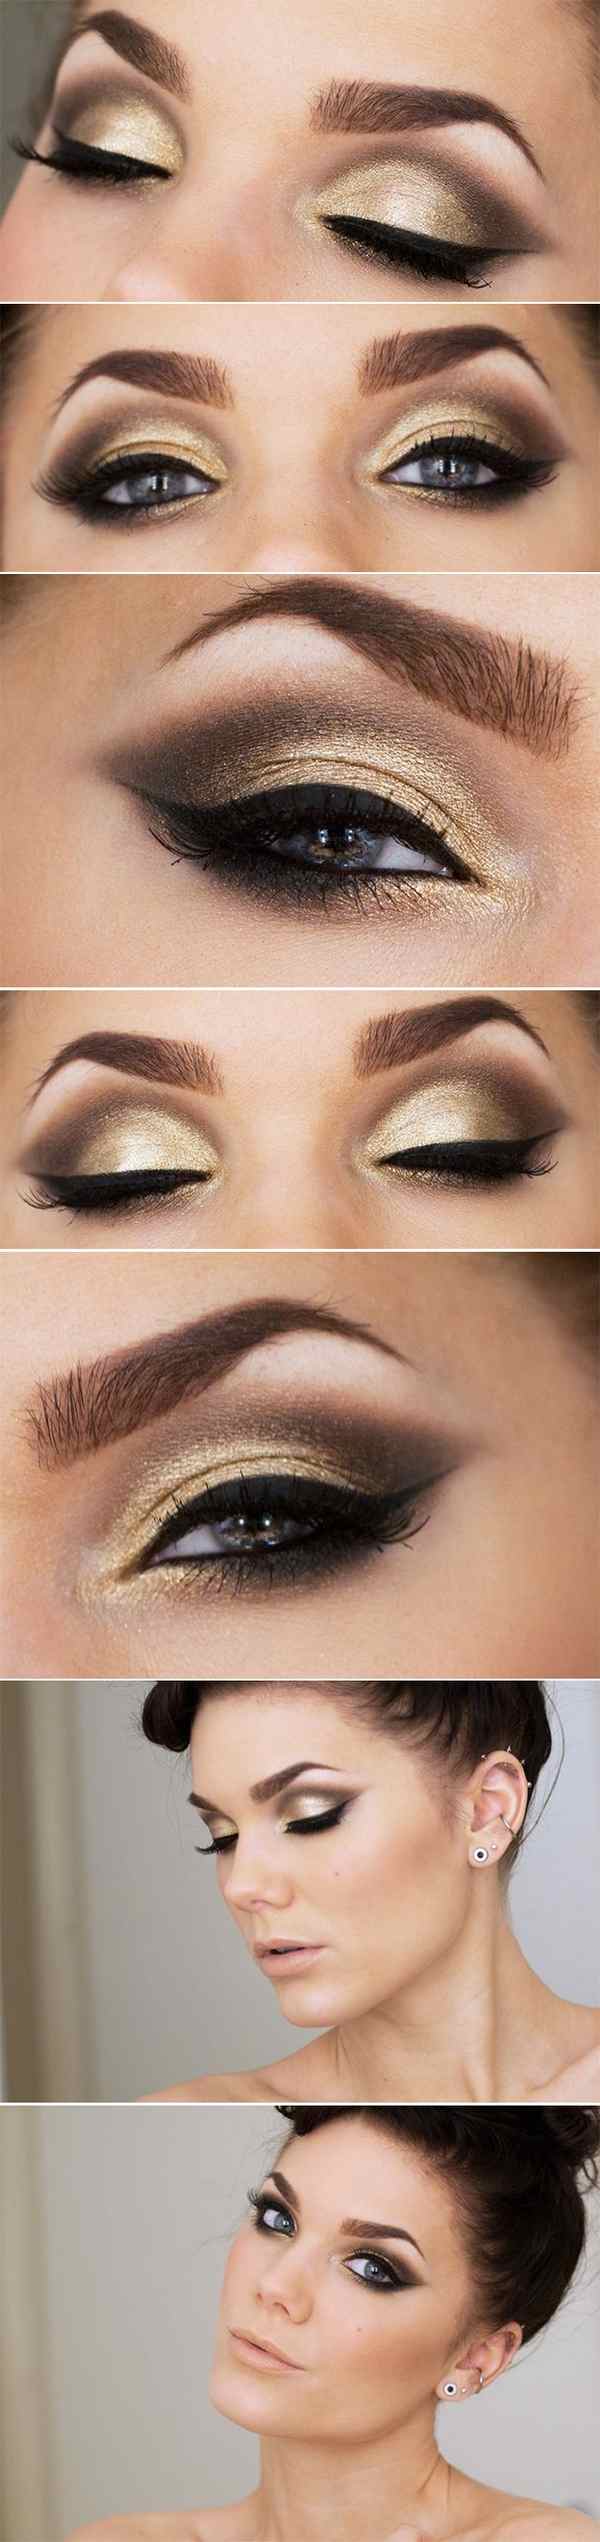 how to choose the style of prom makeup